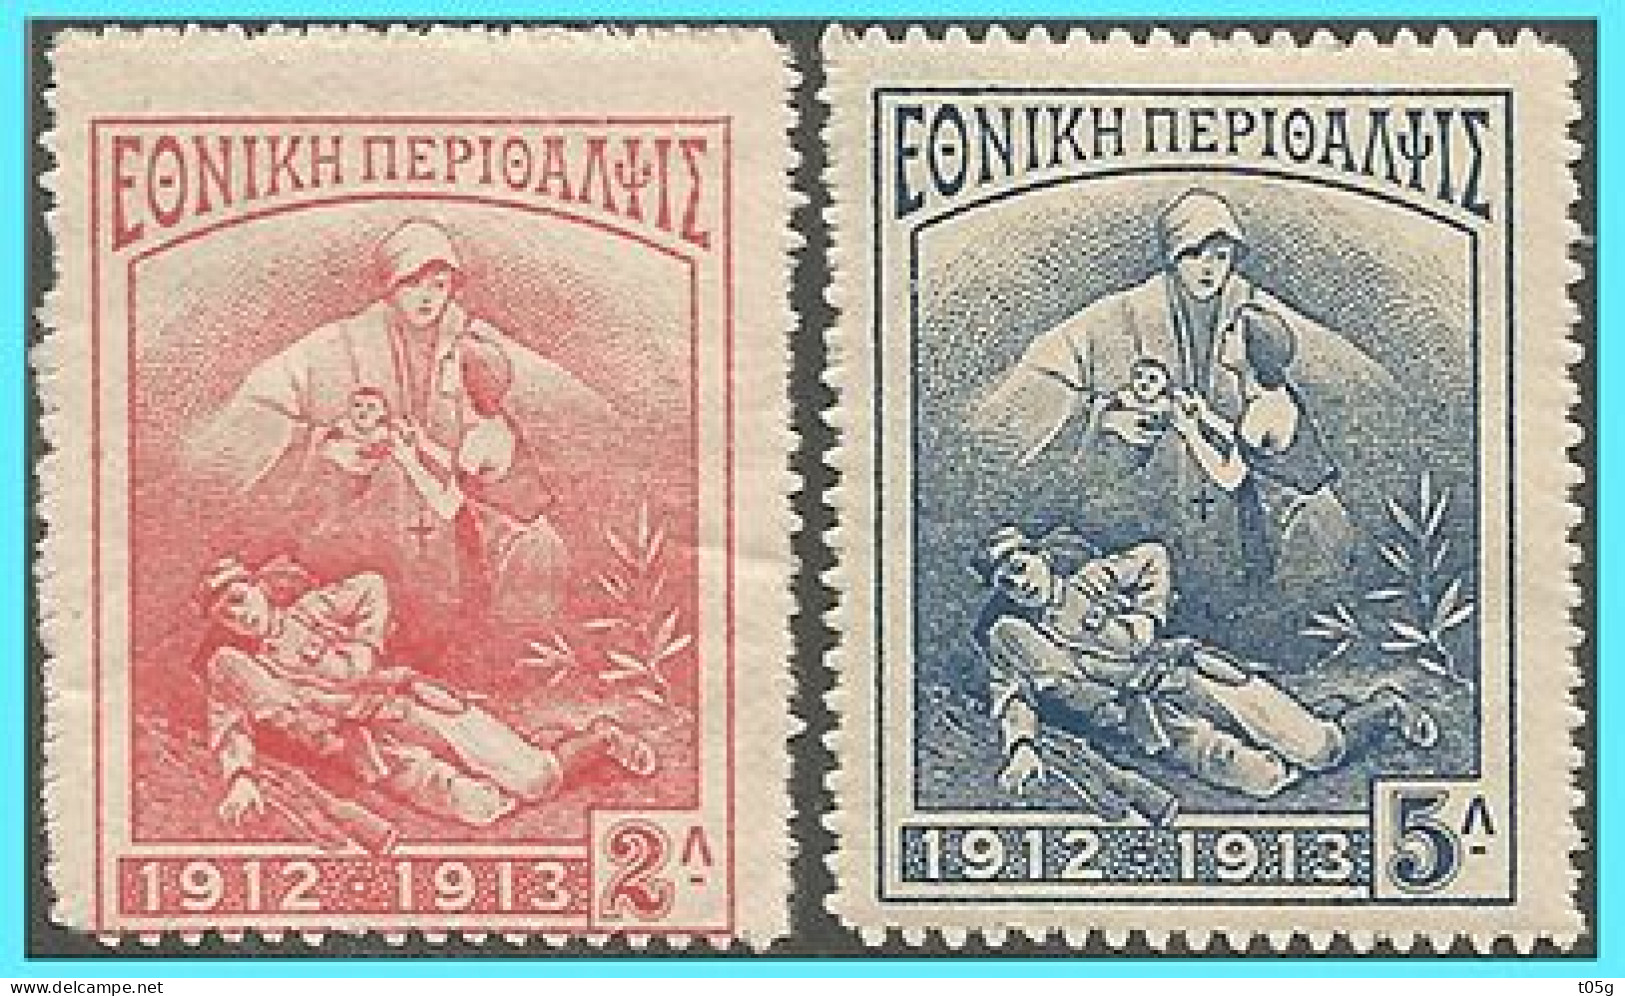 GREECE- GRECE - HELLAS  - CHARITY STAMPS 1914:   "National Relief" Compl. Set MNH** - Bienfaisance